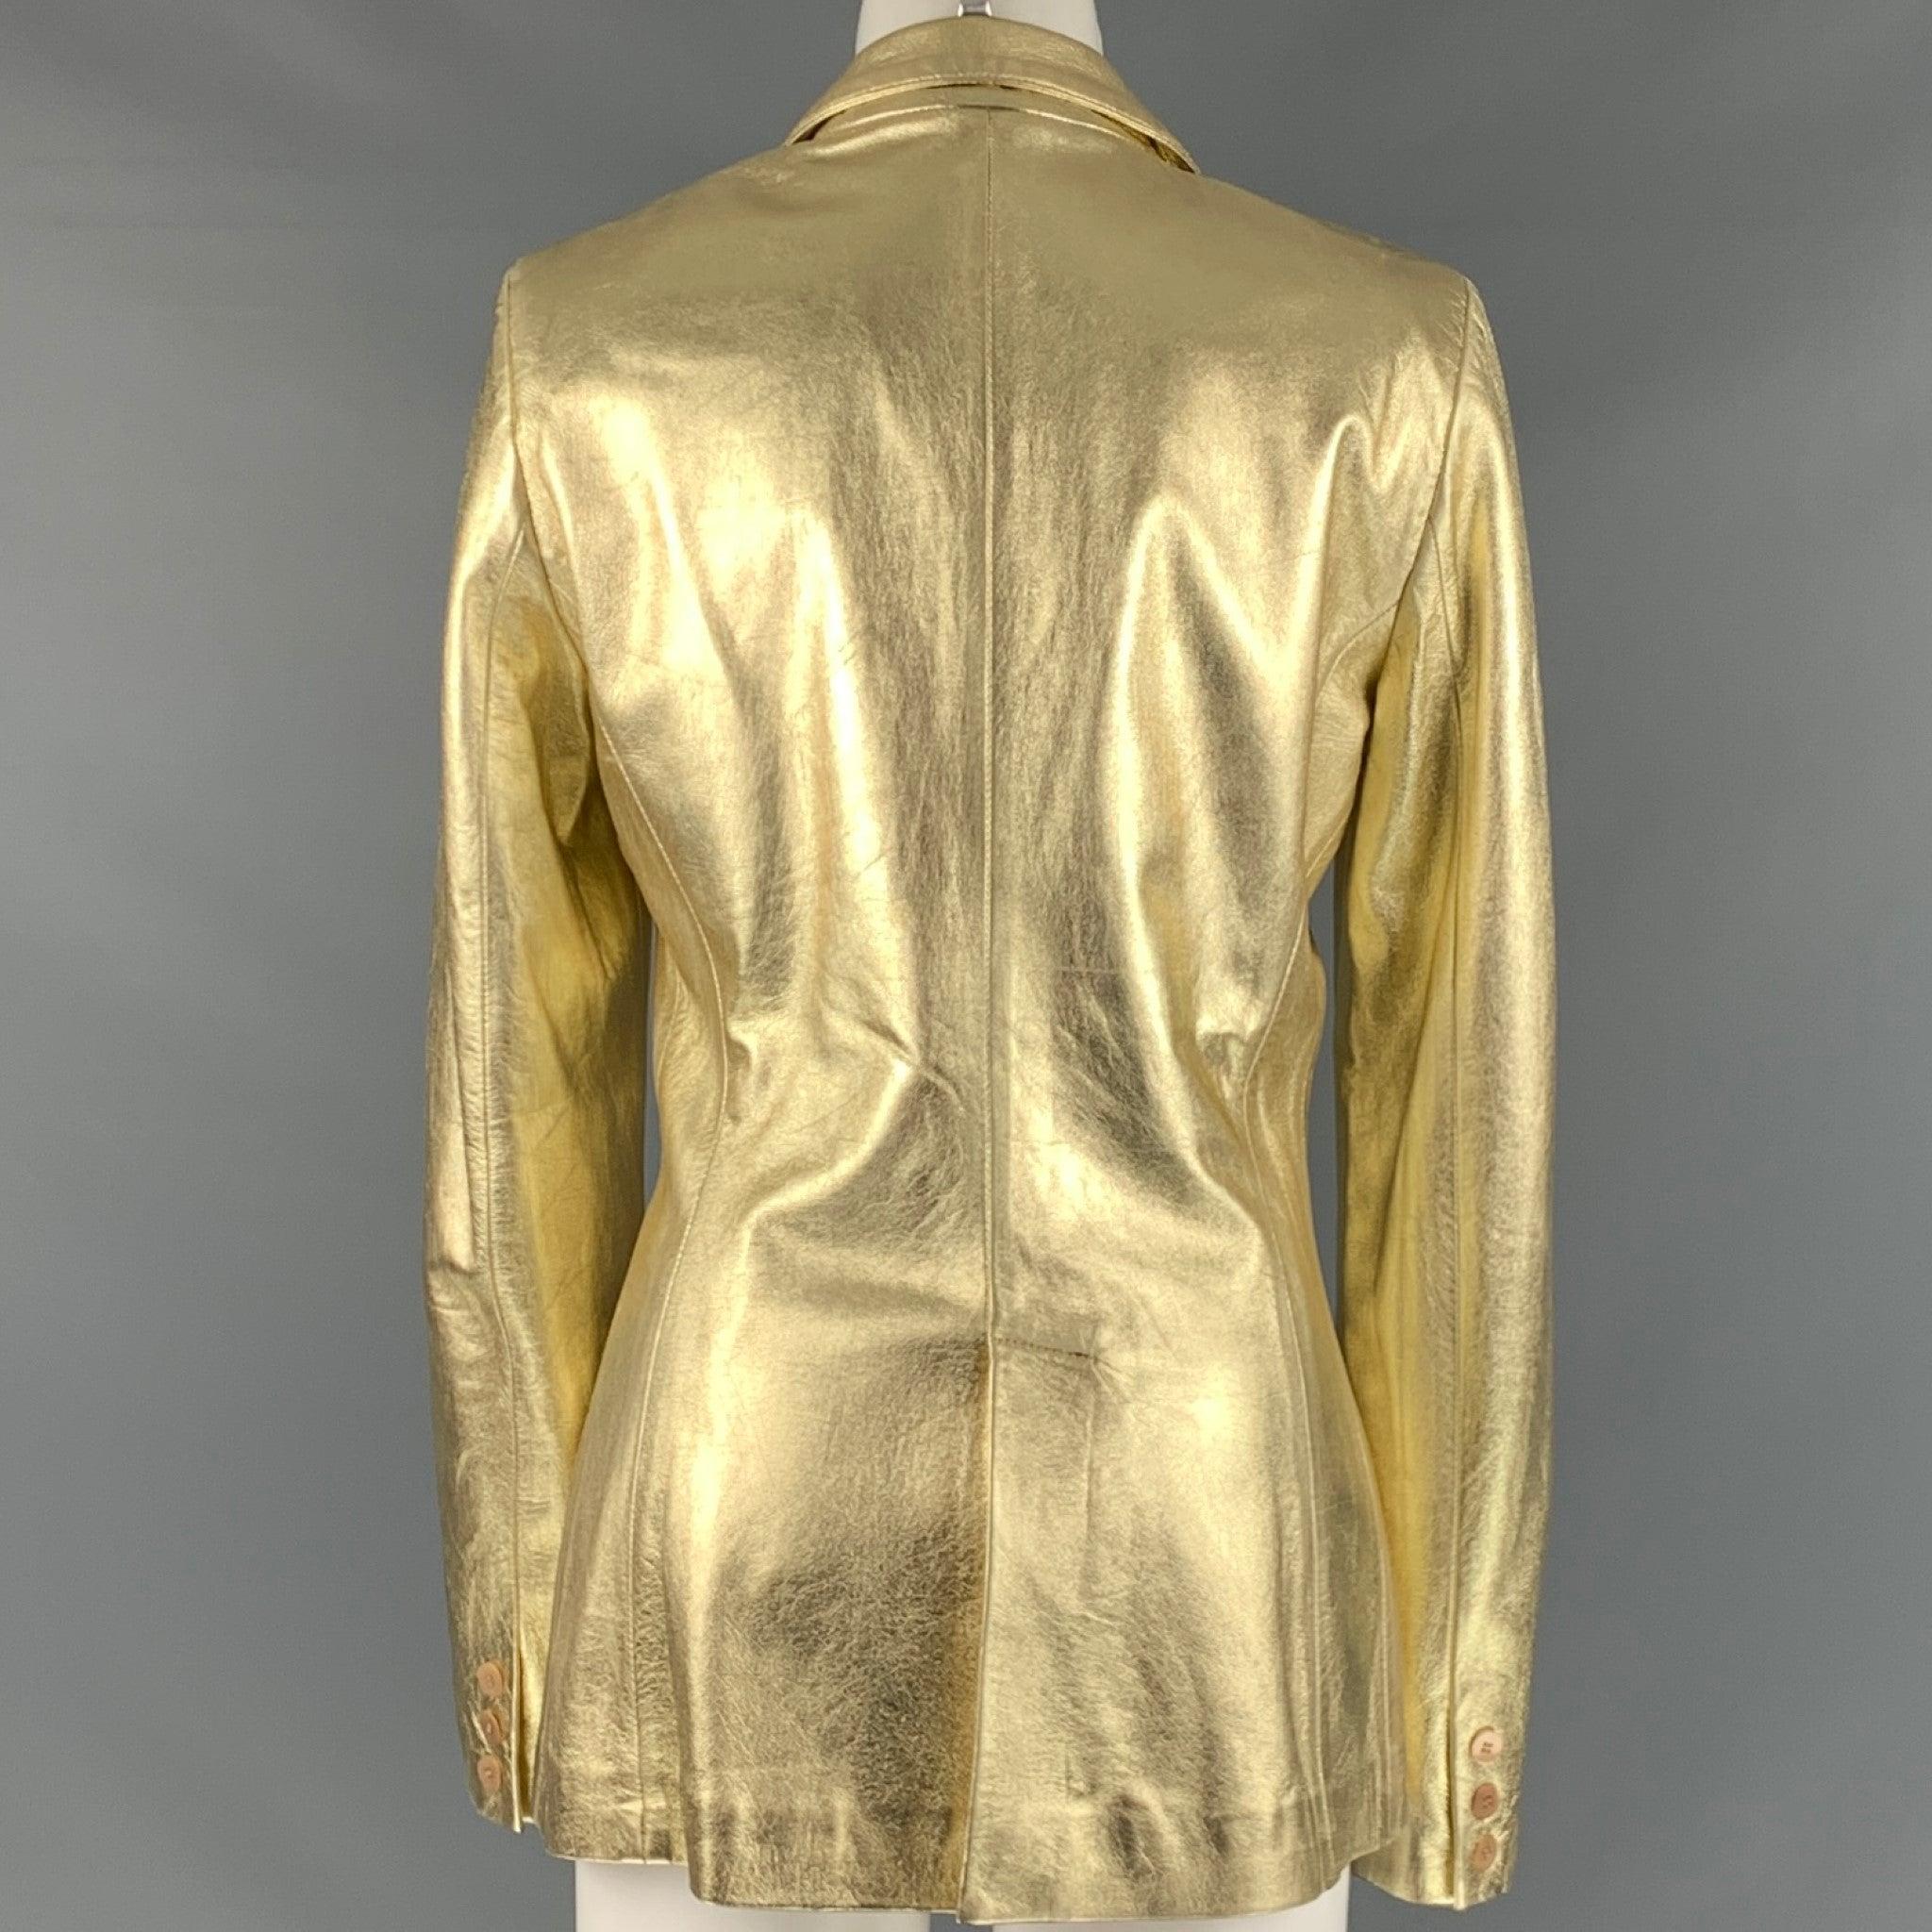 BLUMARINE Size 8 Gold Leather Metallic Lambskin Jacket In Good Condition For Sale In San Francisco, CA